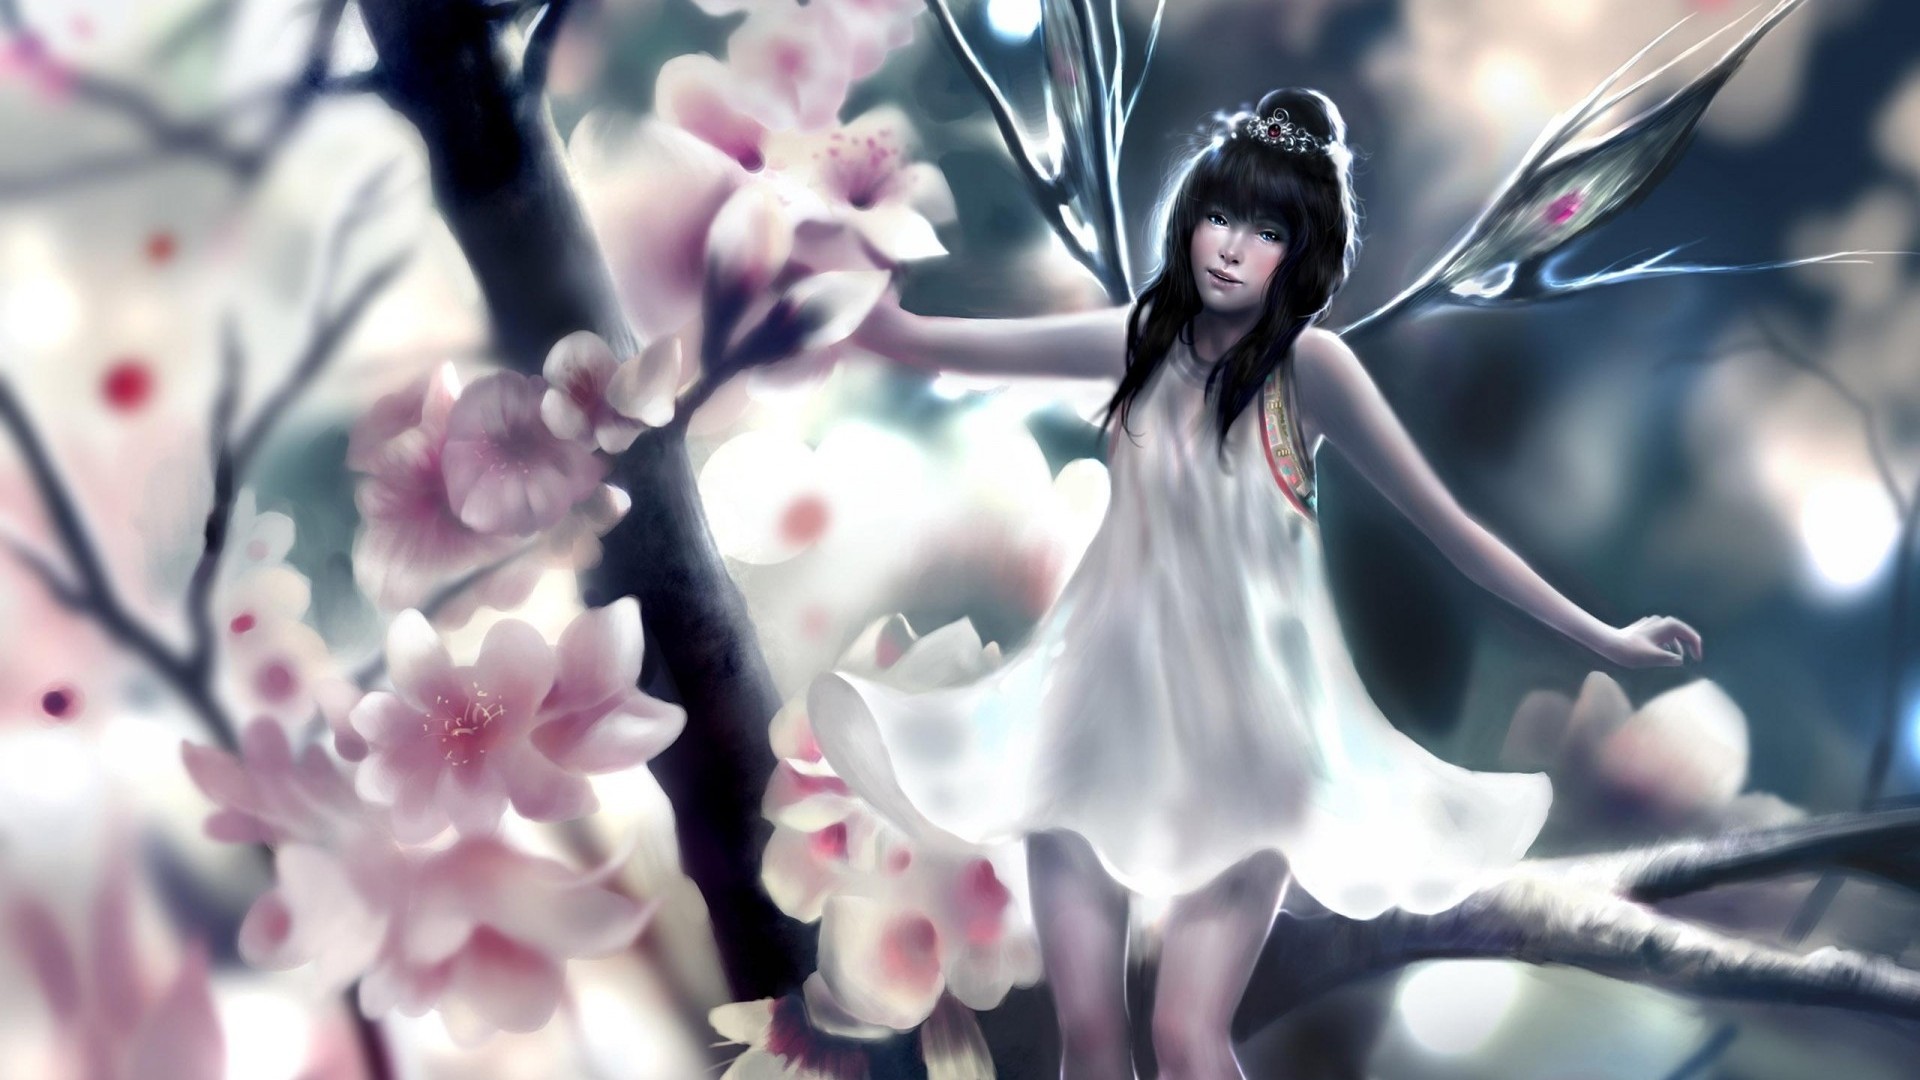 1920x1080 Fairy wallpapers HD pictures download.